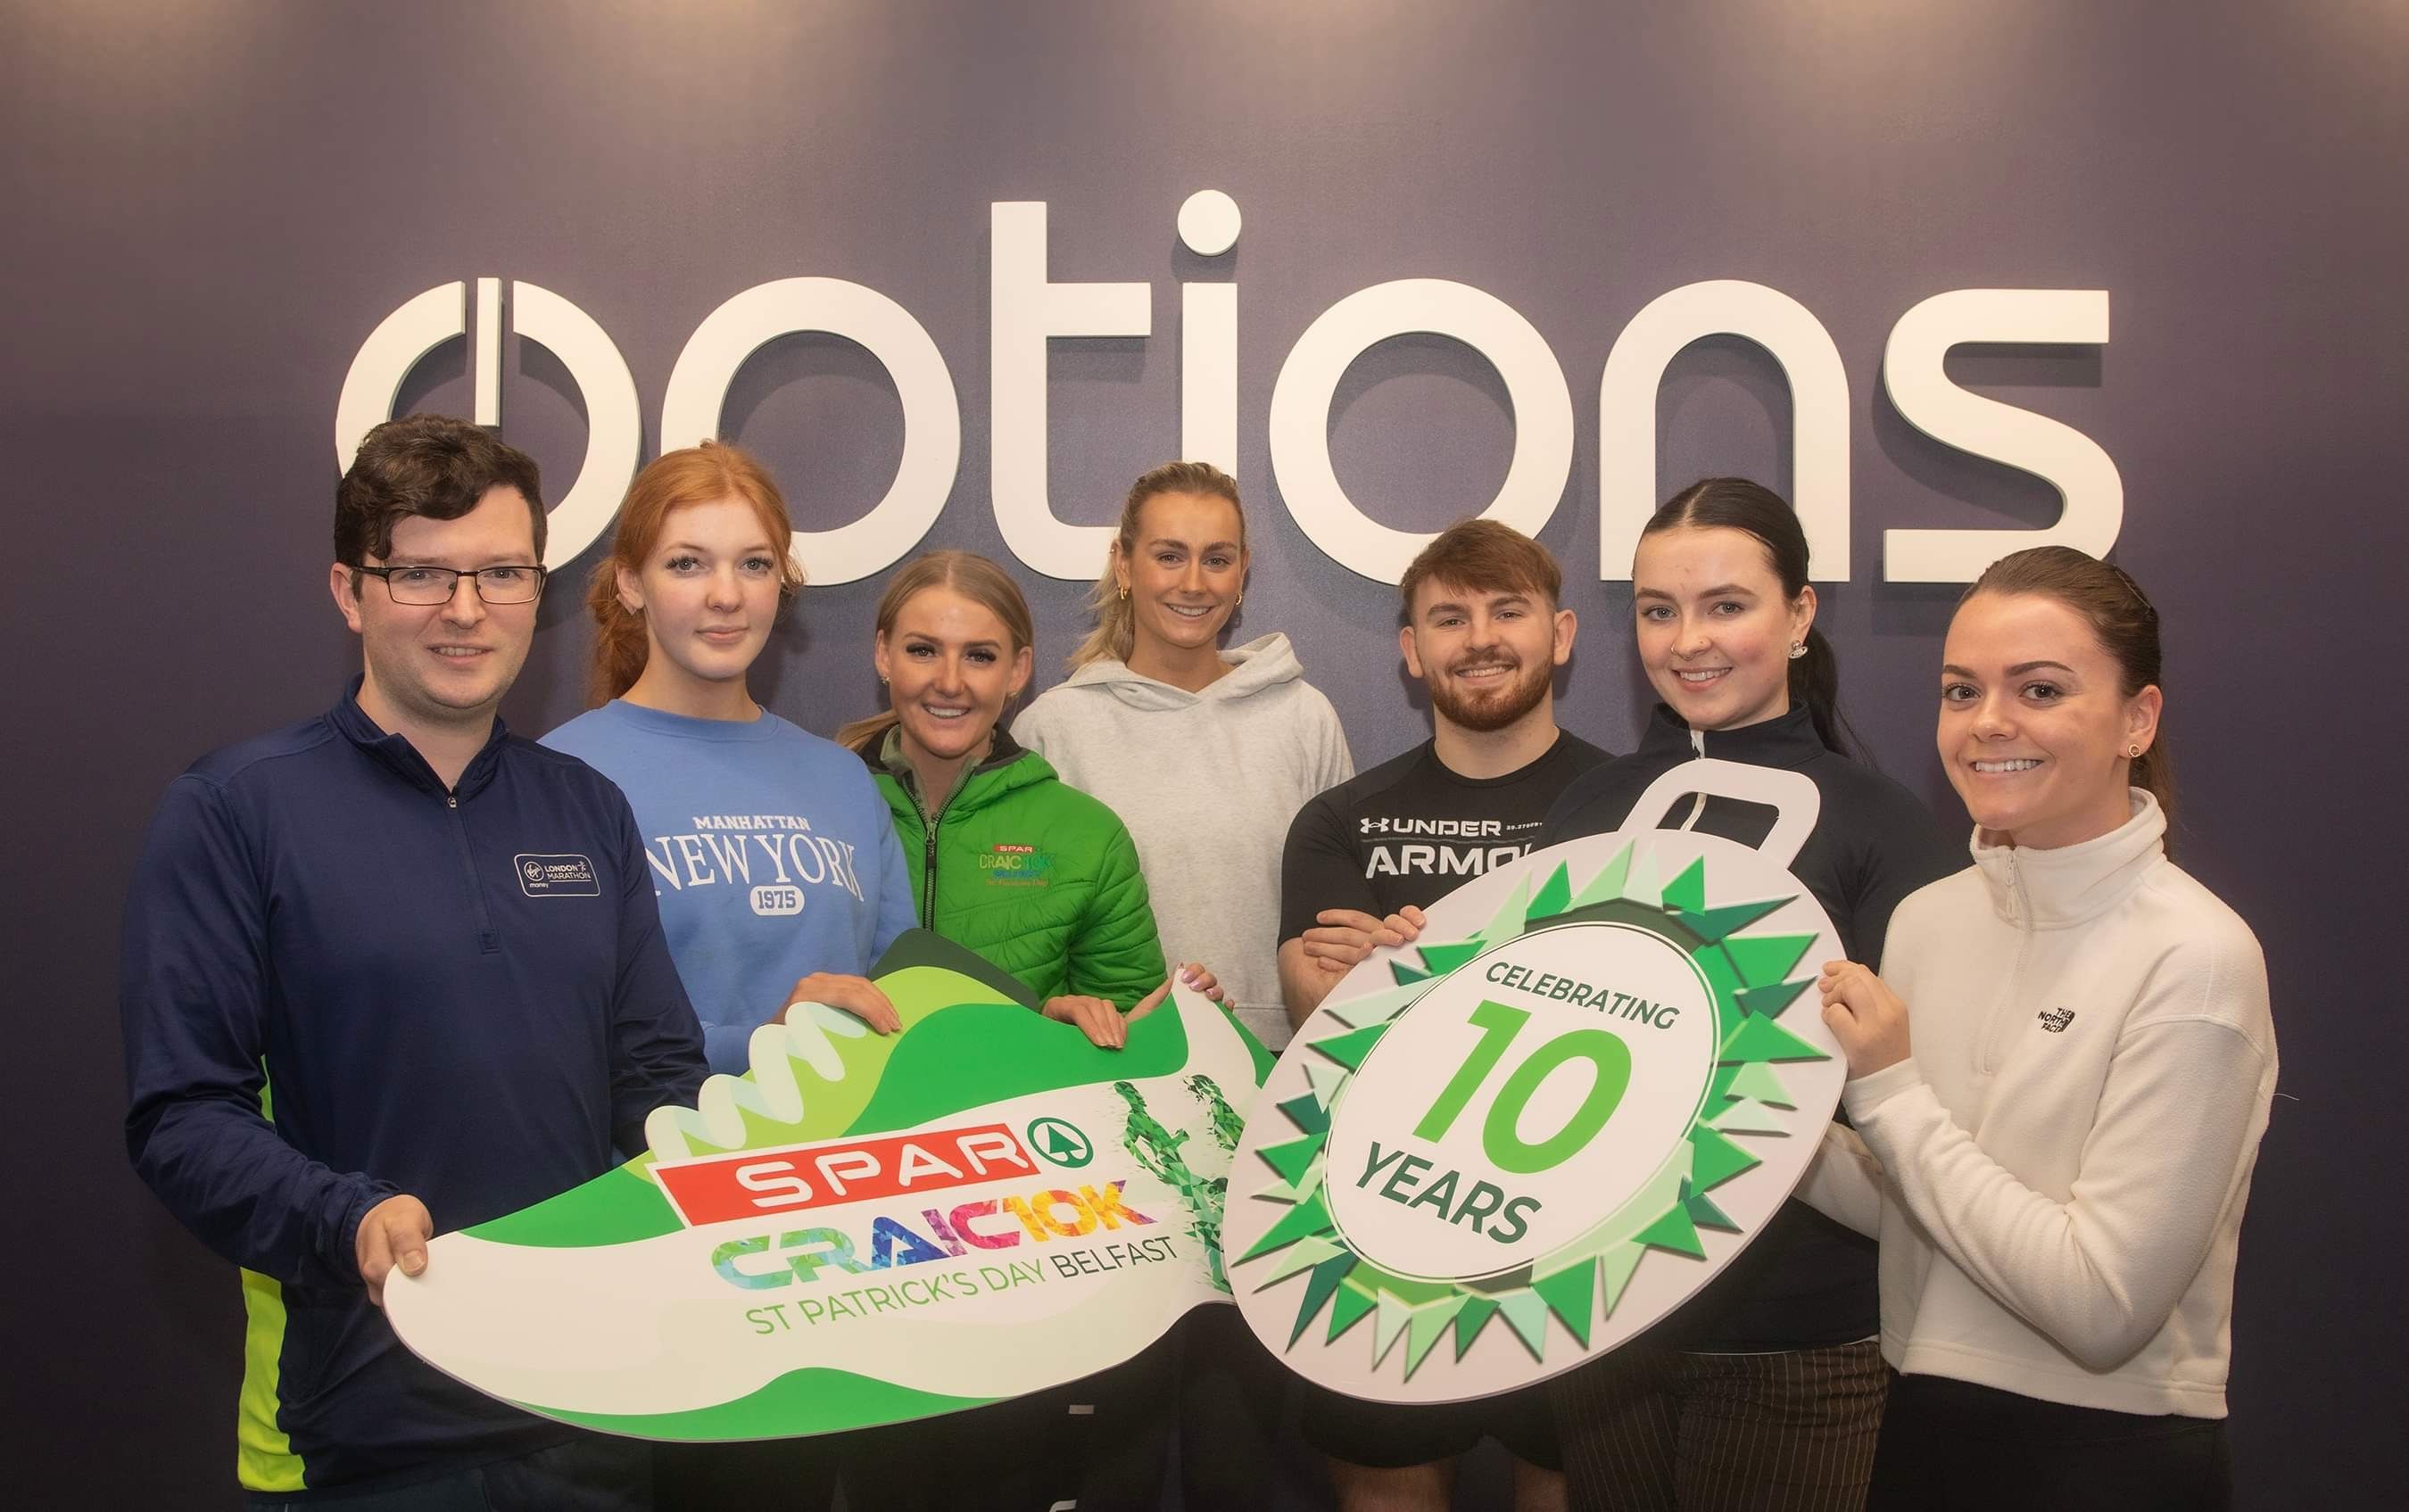 Options staff gearing up for the SPAR Craic 10k